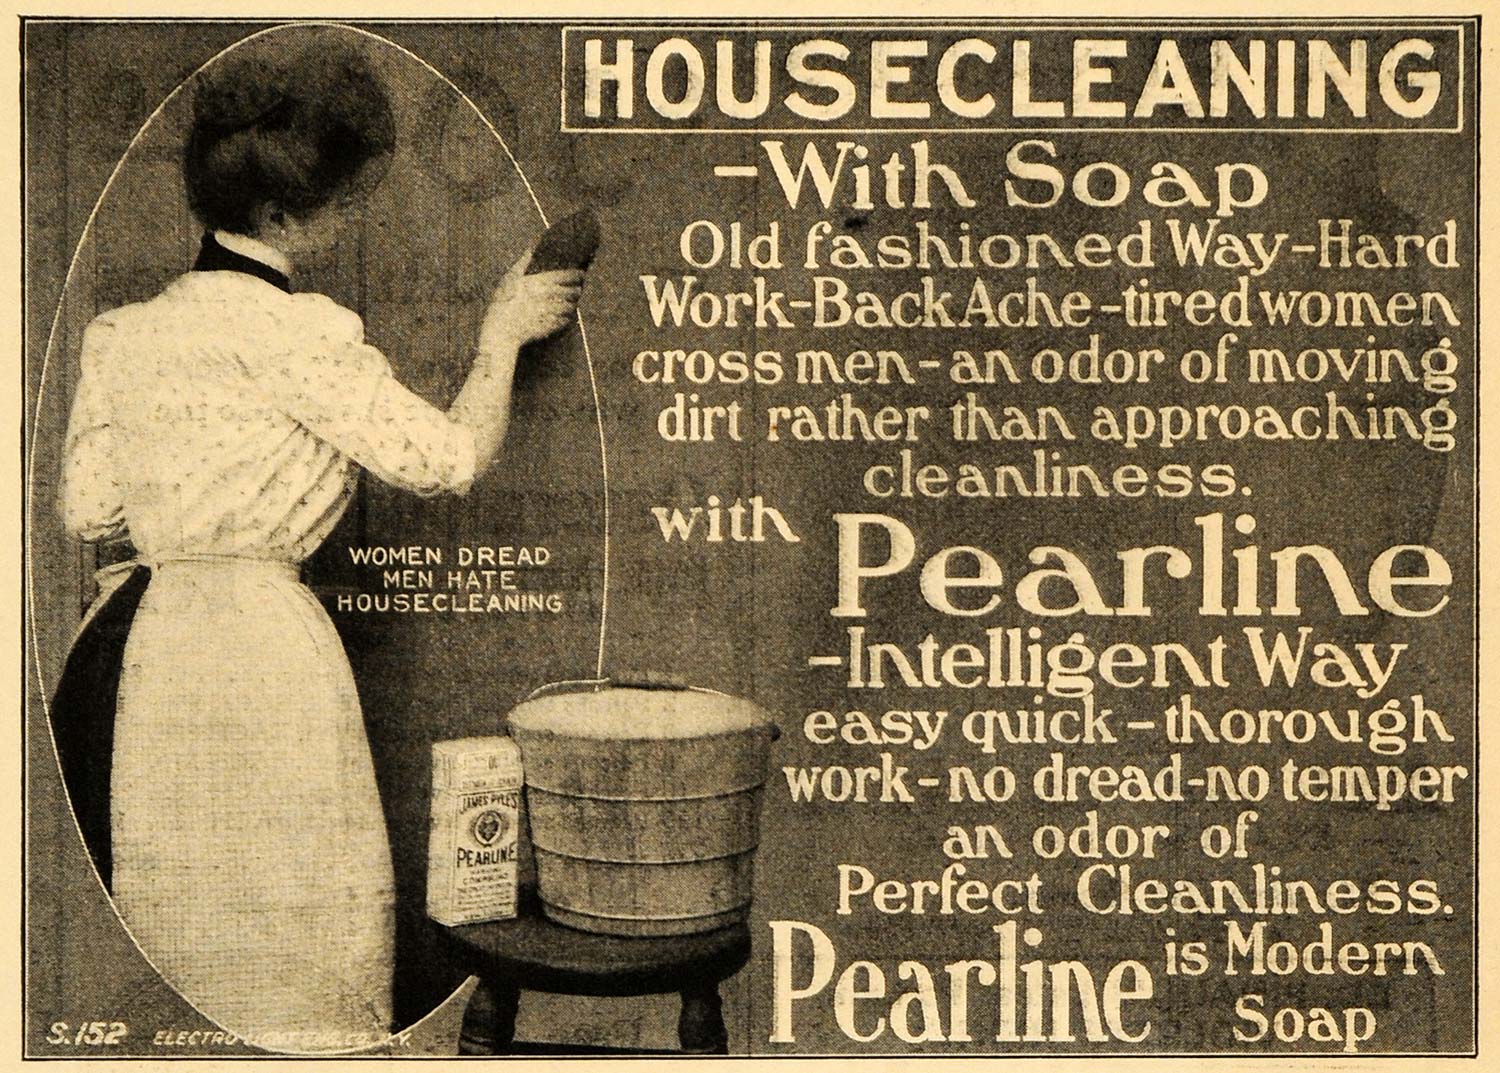 1903 Ad James Pyle Pearline Washing Soap Detergent Laundry Housecleaning ARG1